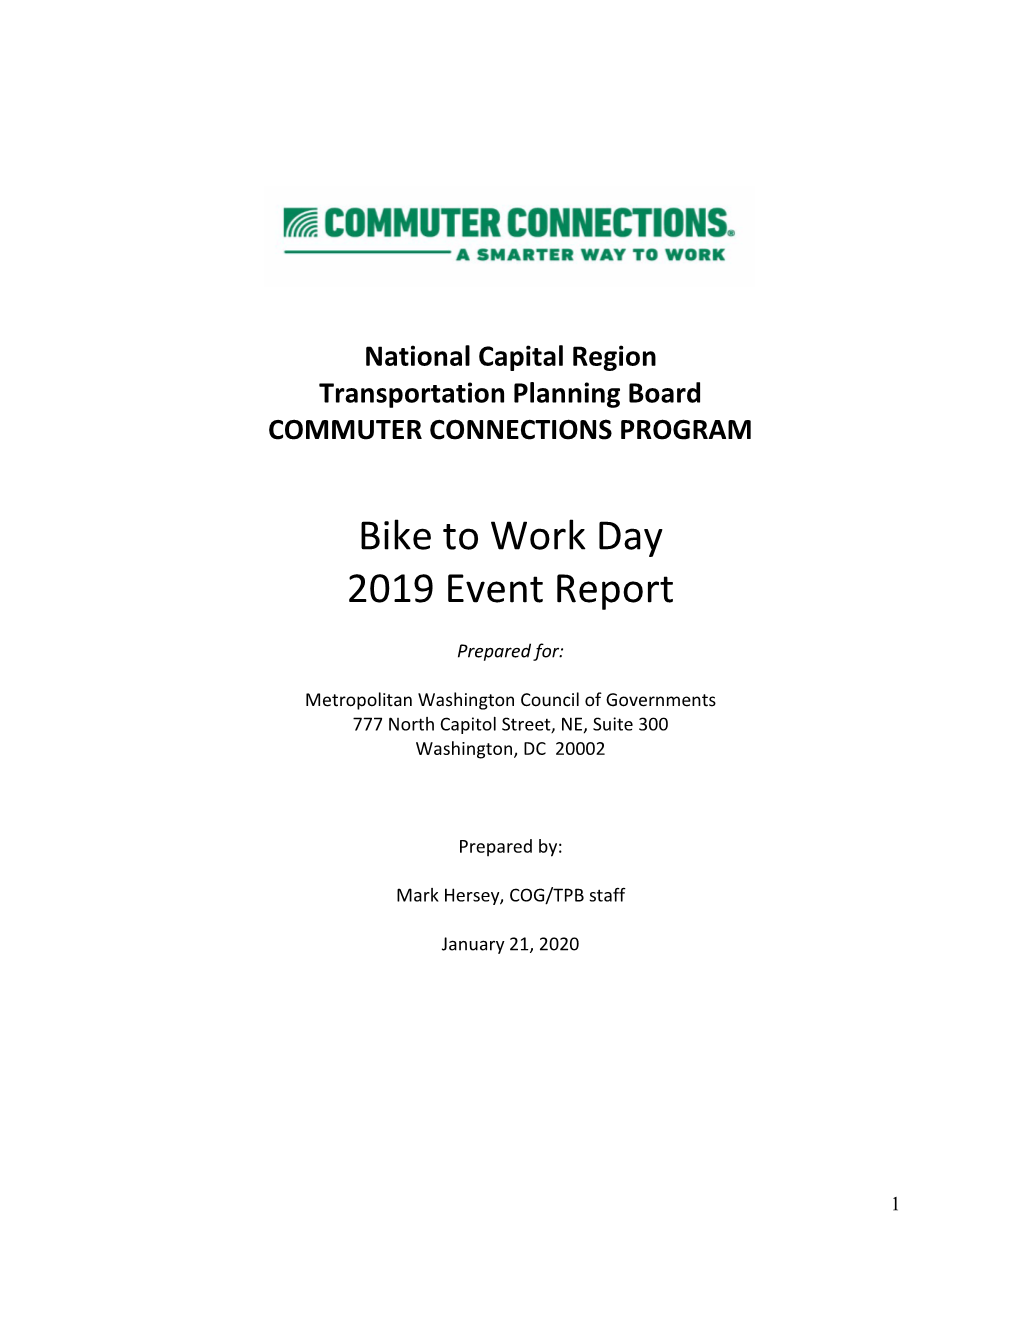 Bike to Work Day 2019 Event Report